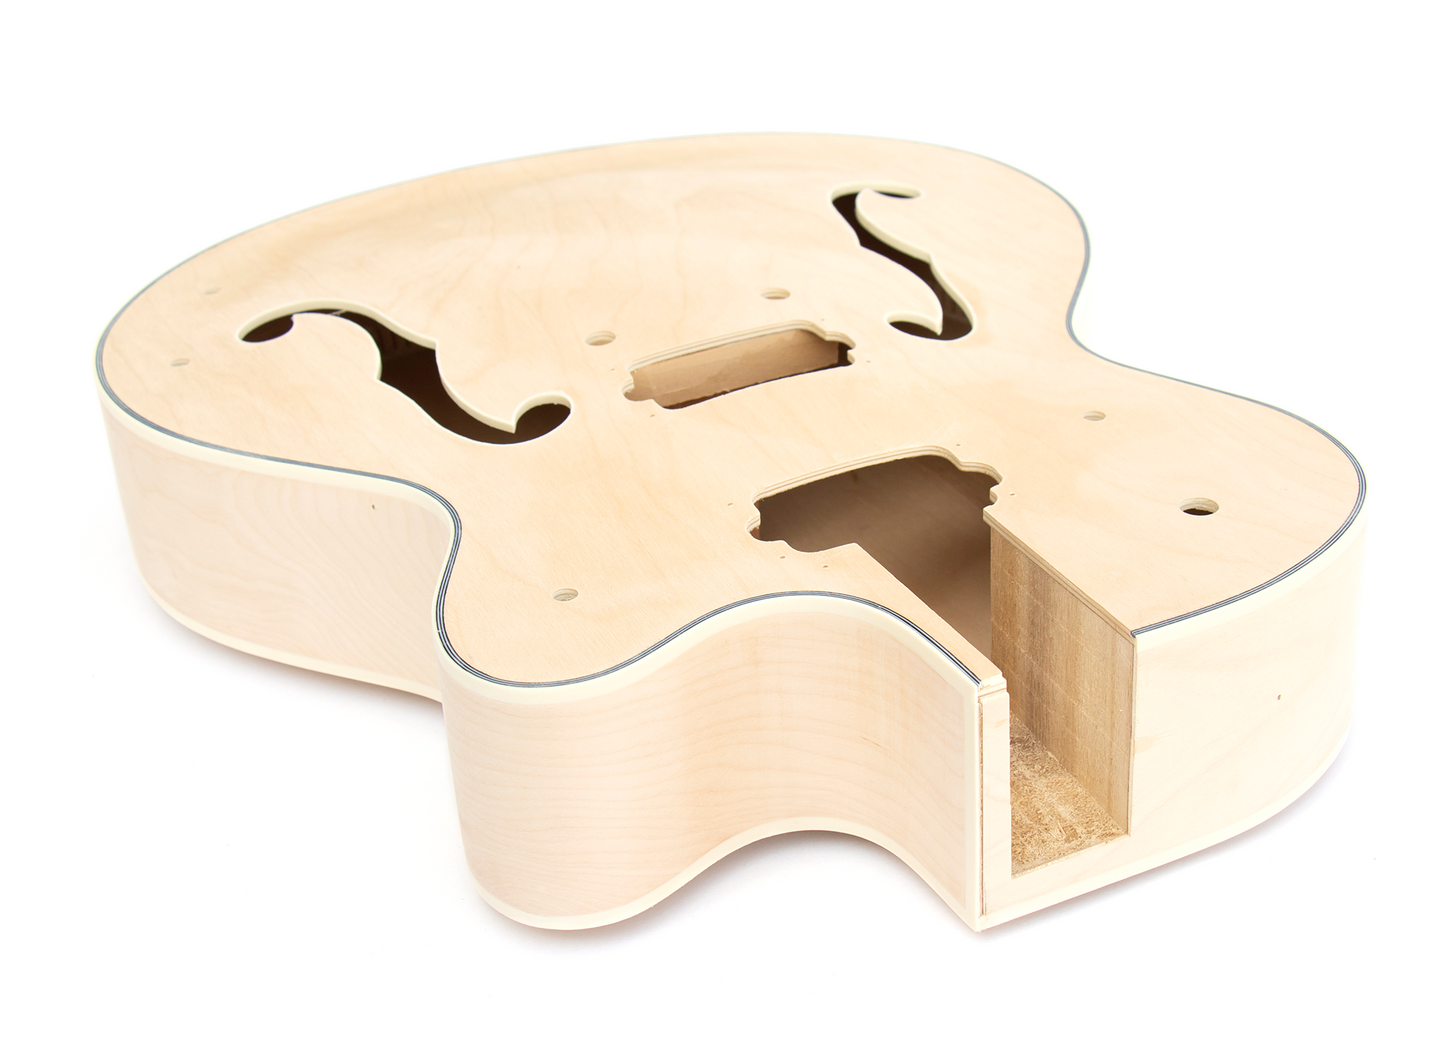 HB Hollow Body Style Build Your Own Guitar Kit